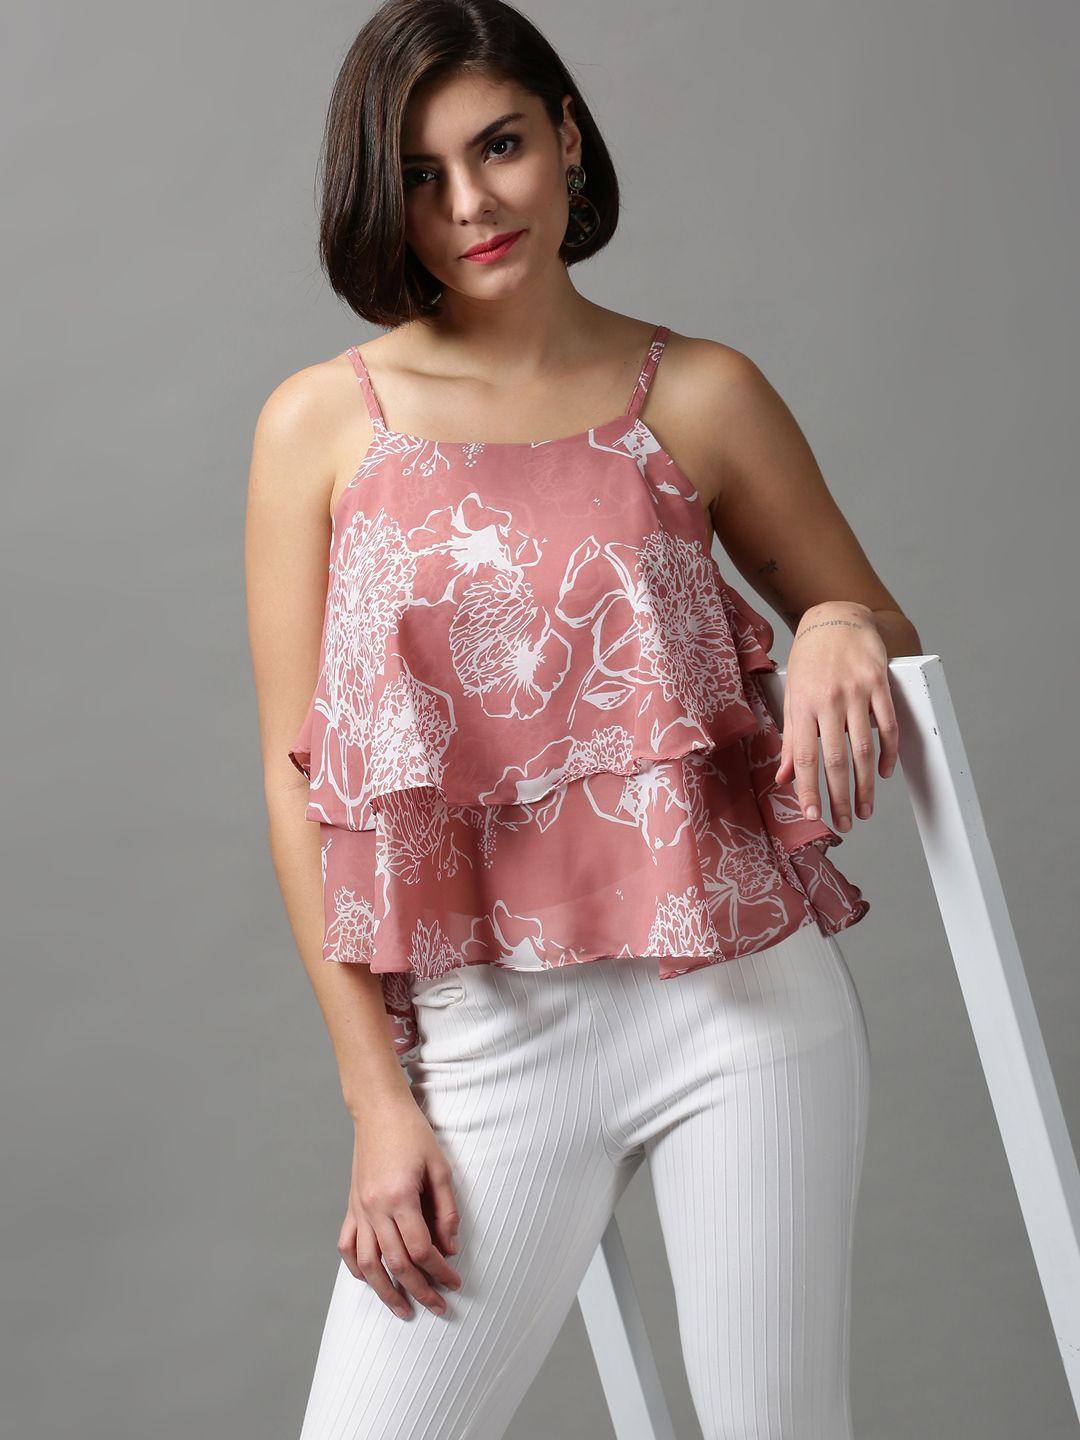 SHOWOFF Pink & White Floral Print Layered Chiffon Tiered Top